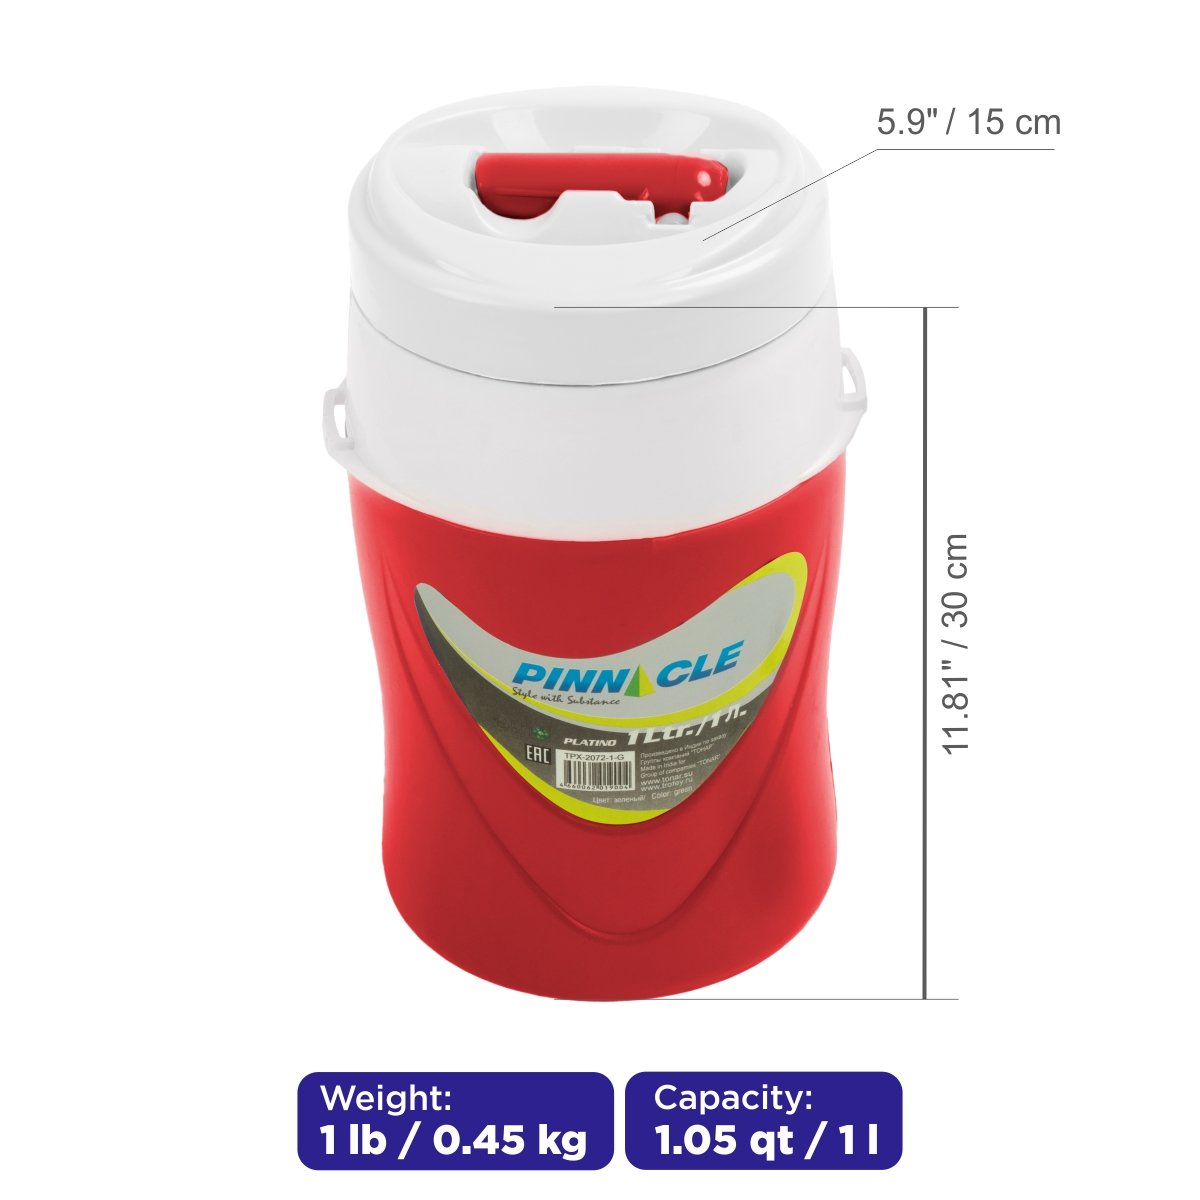 Platino Portable Beverage Cooler Jug for Outdoors and School, 1 qt weighs 1 lb and is 11.8 inches high and 6 inches wide.